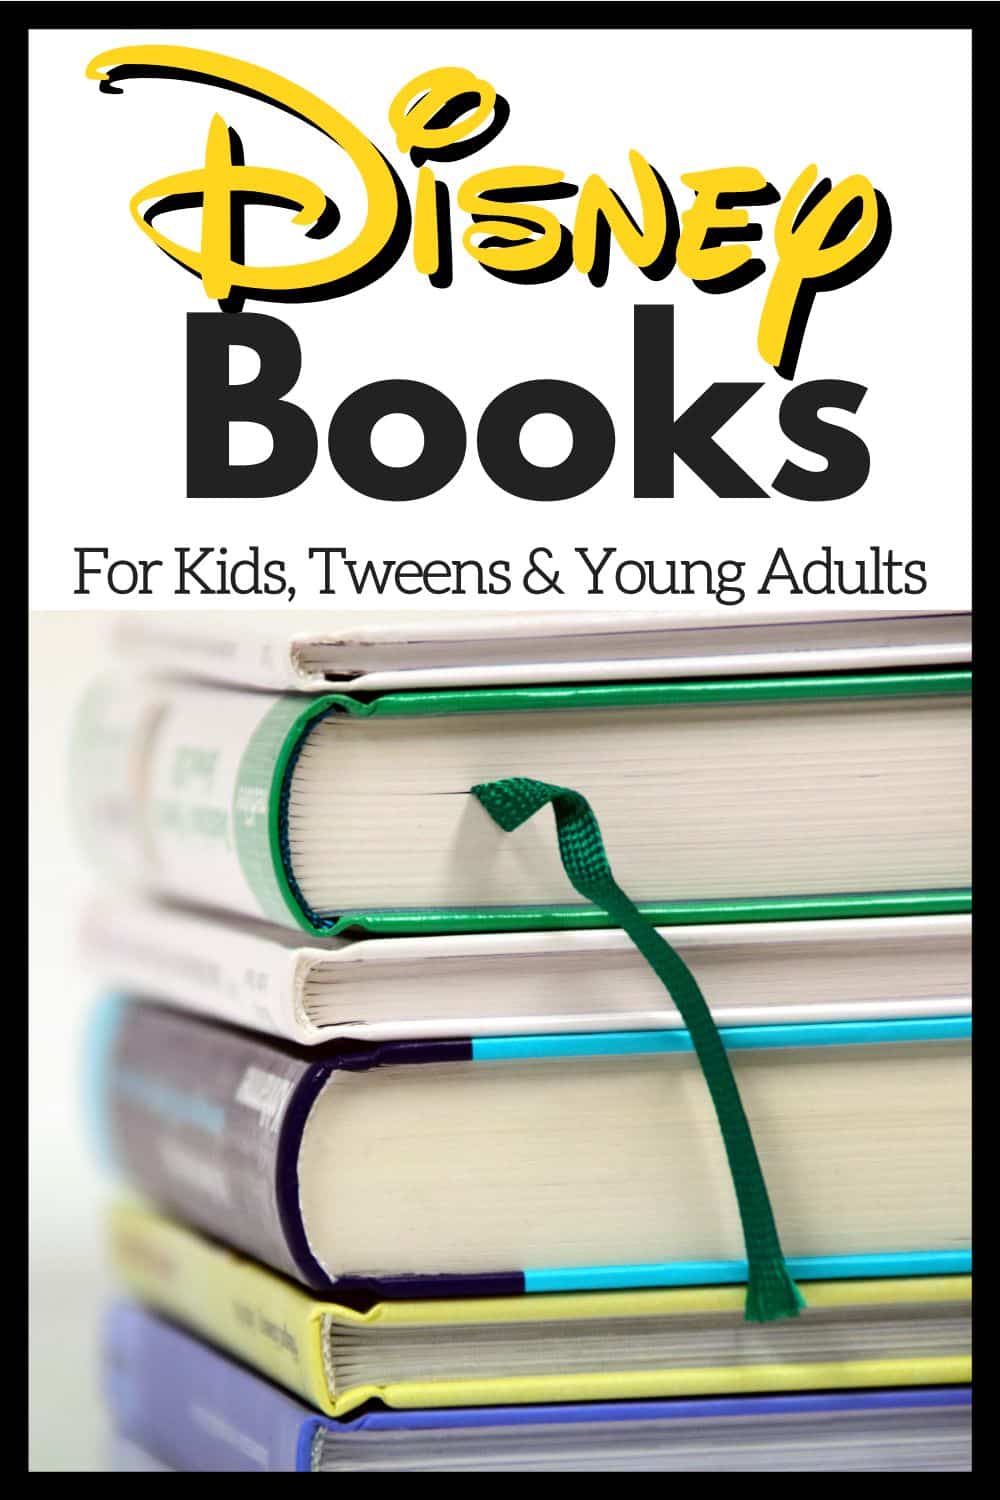 BEST Disney Books for Kids, Tweens & Young Adults